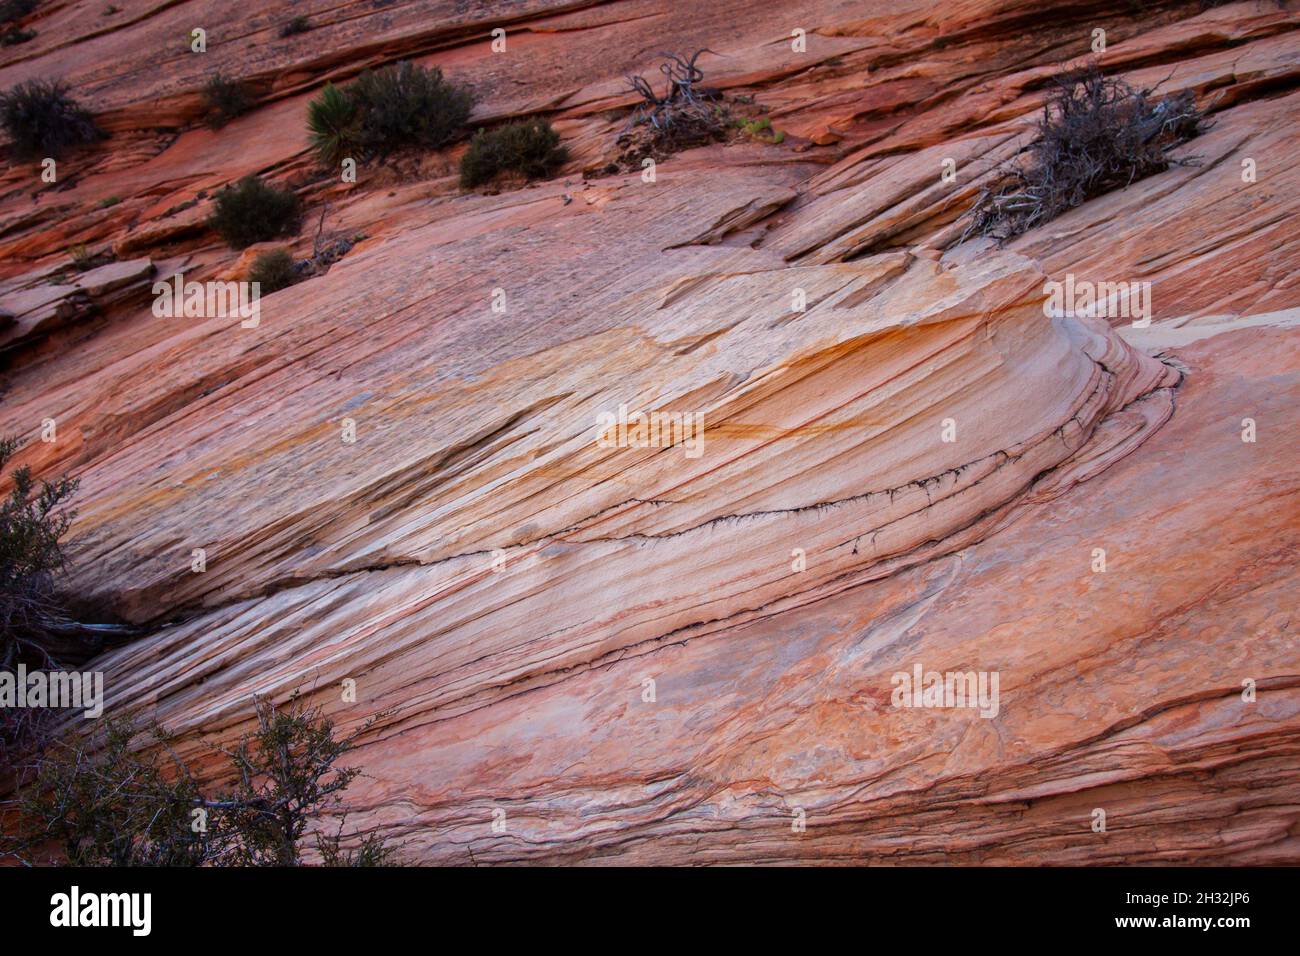 Amazing layered sandstone formation with cracks closeup | Orange sandstone layers with yellow color marks and some bushes Stock Photo